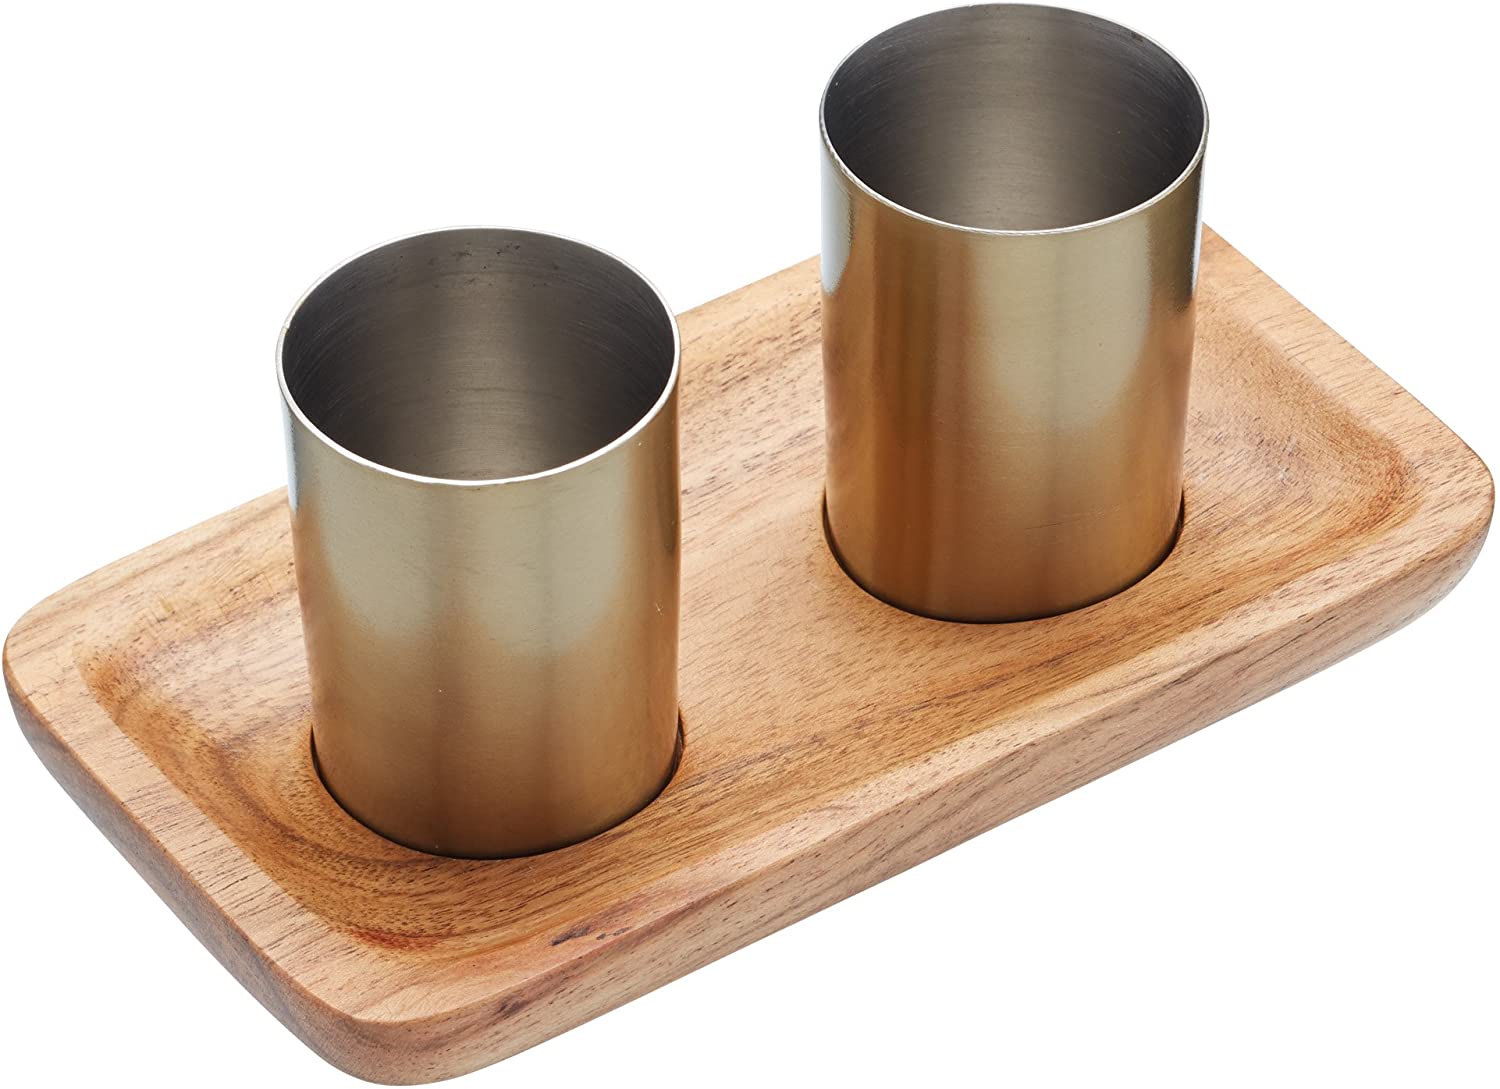 Kitchen Craft Bar Craft Shot Glass with Counter Board in Silver/Brown, Stainless Steel/Wood, 12 x 17 x 22 cm